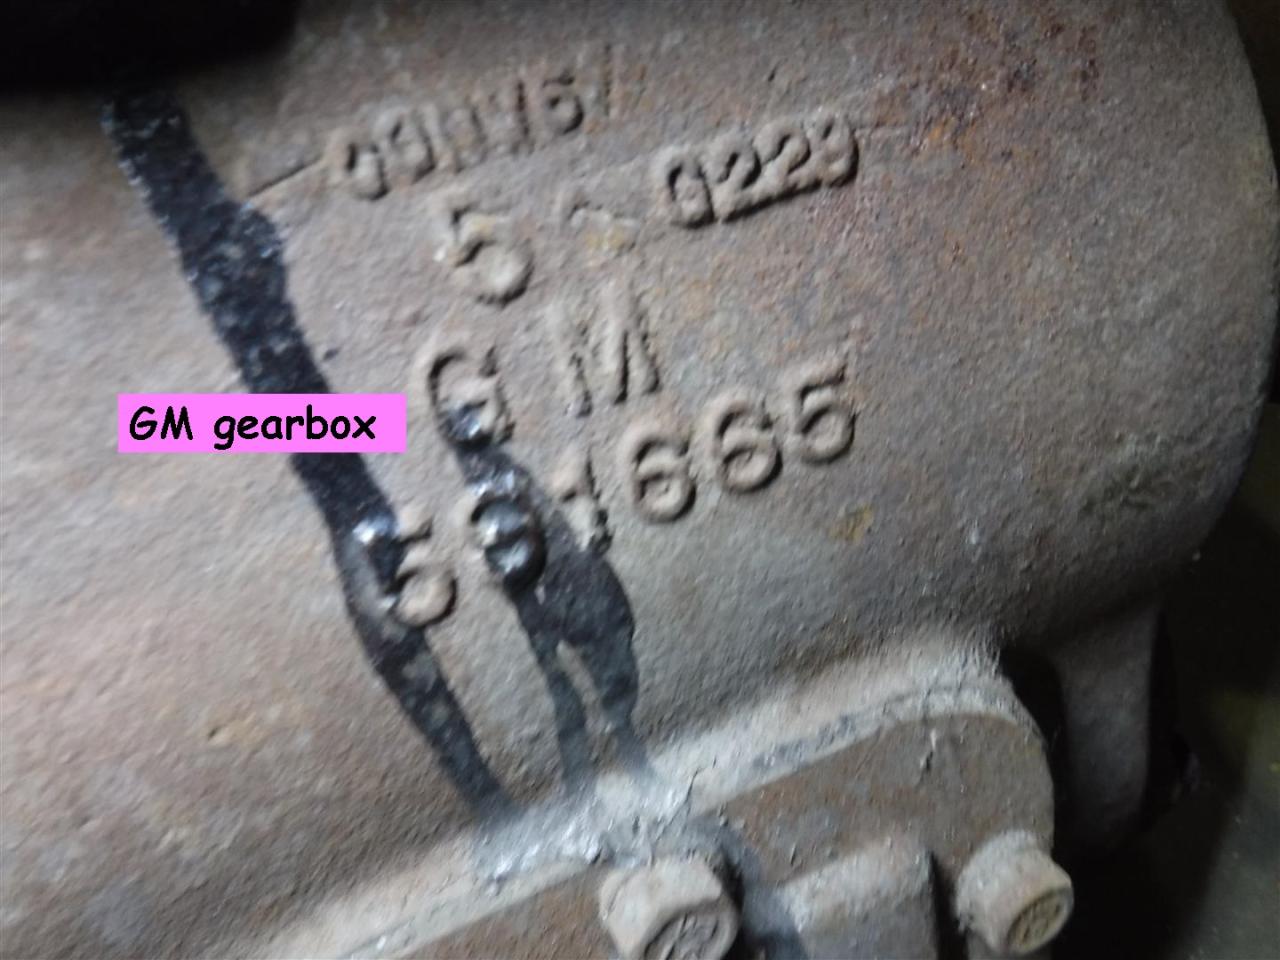 1900 several parts gearboxes